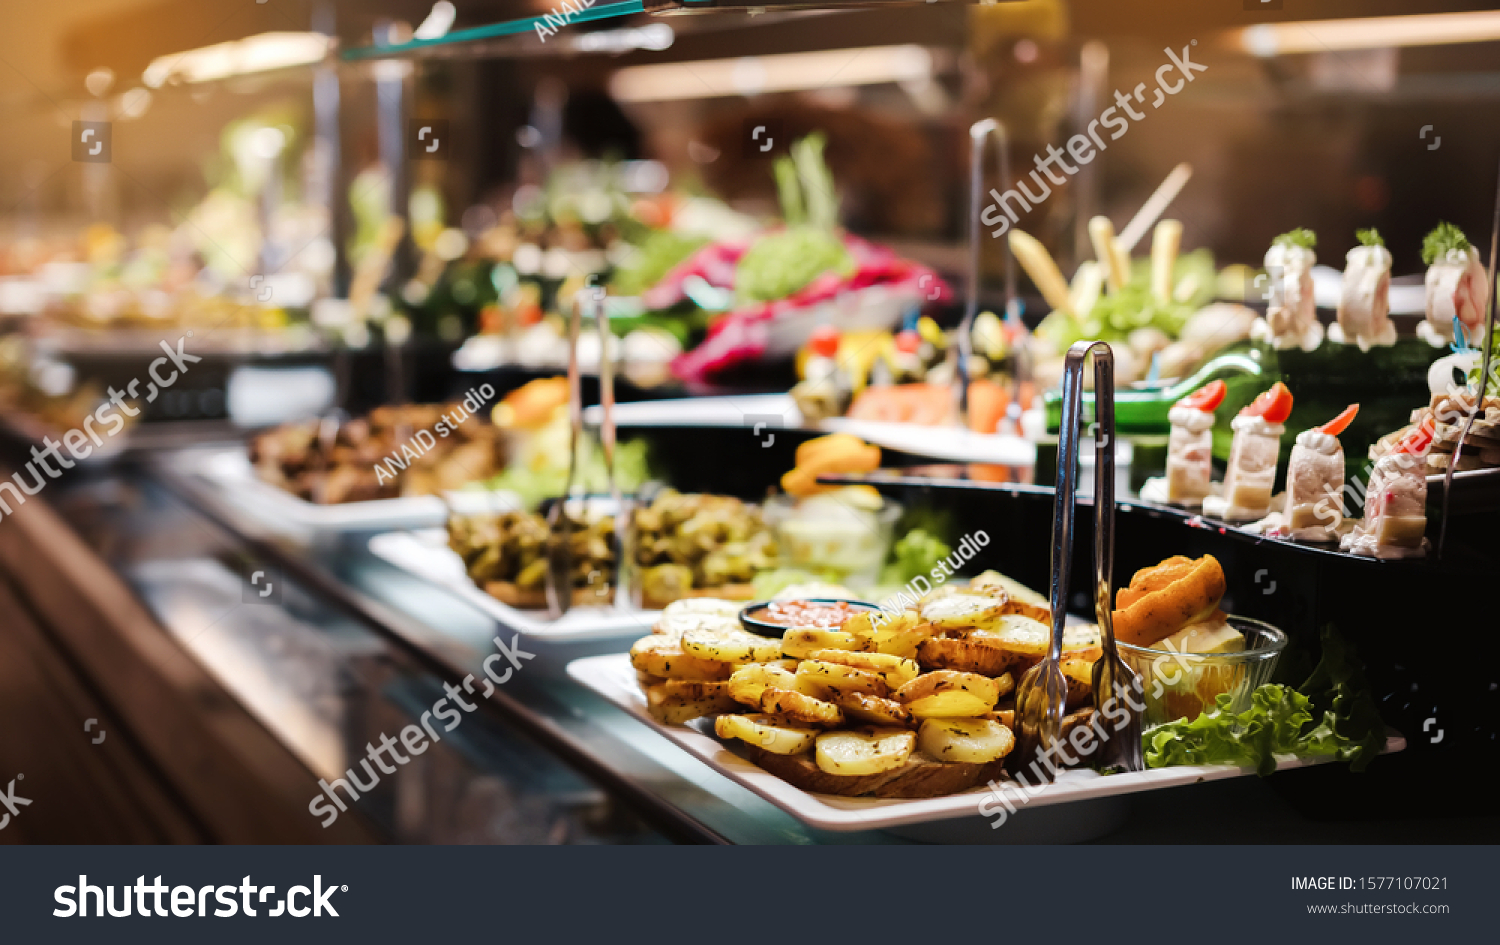 Cuisine Culinary Buffet Dinner Catering Dining Food Celebration Party Concept. #1577107021